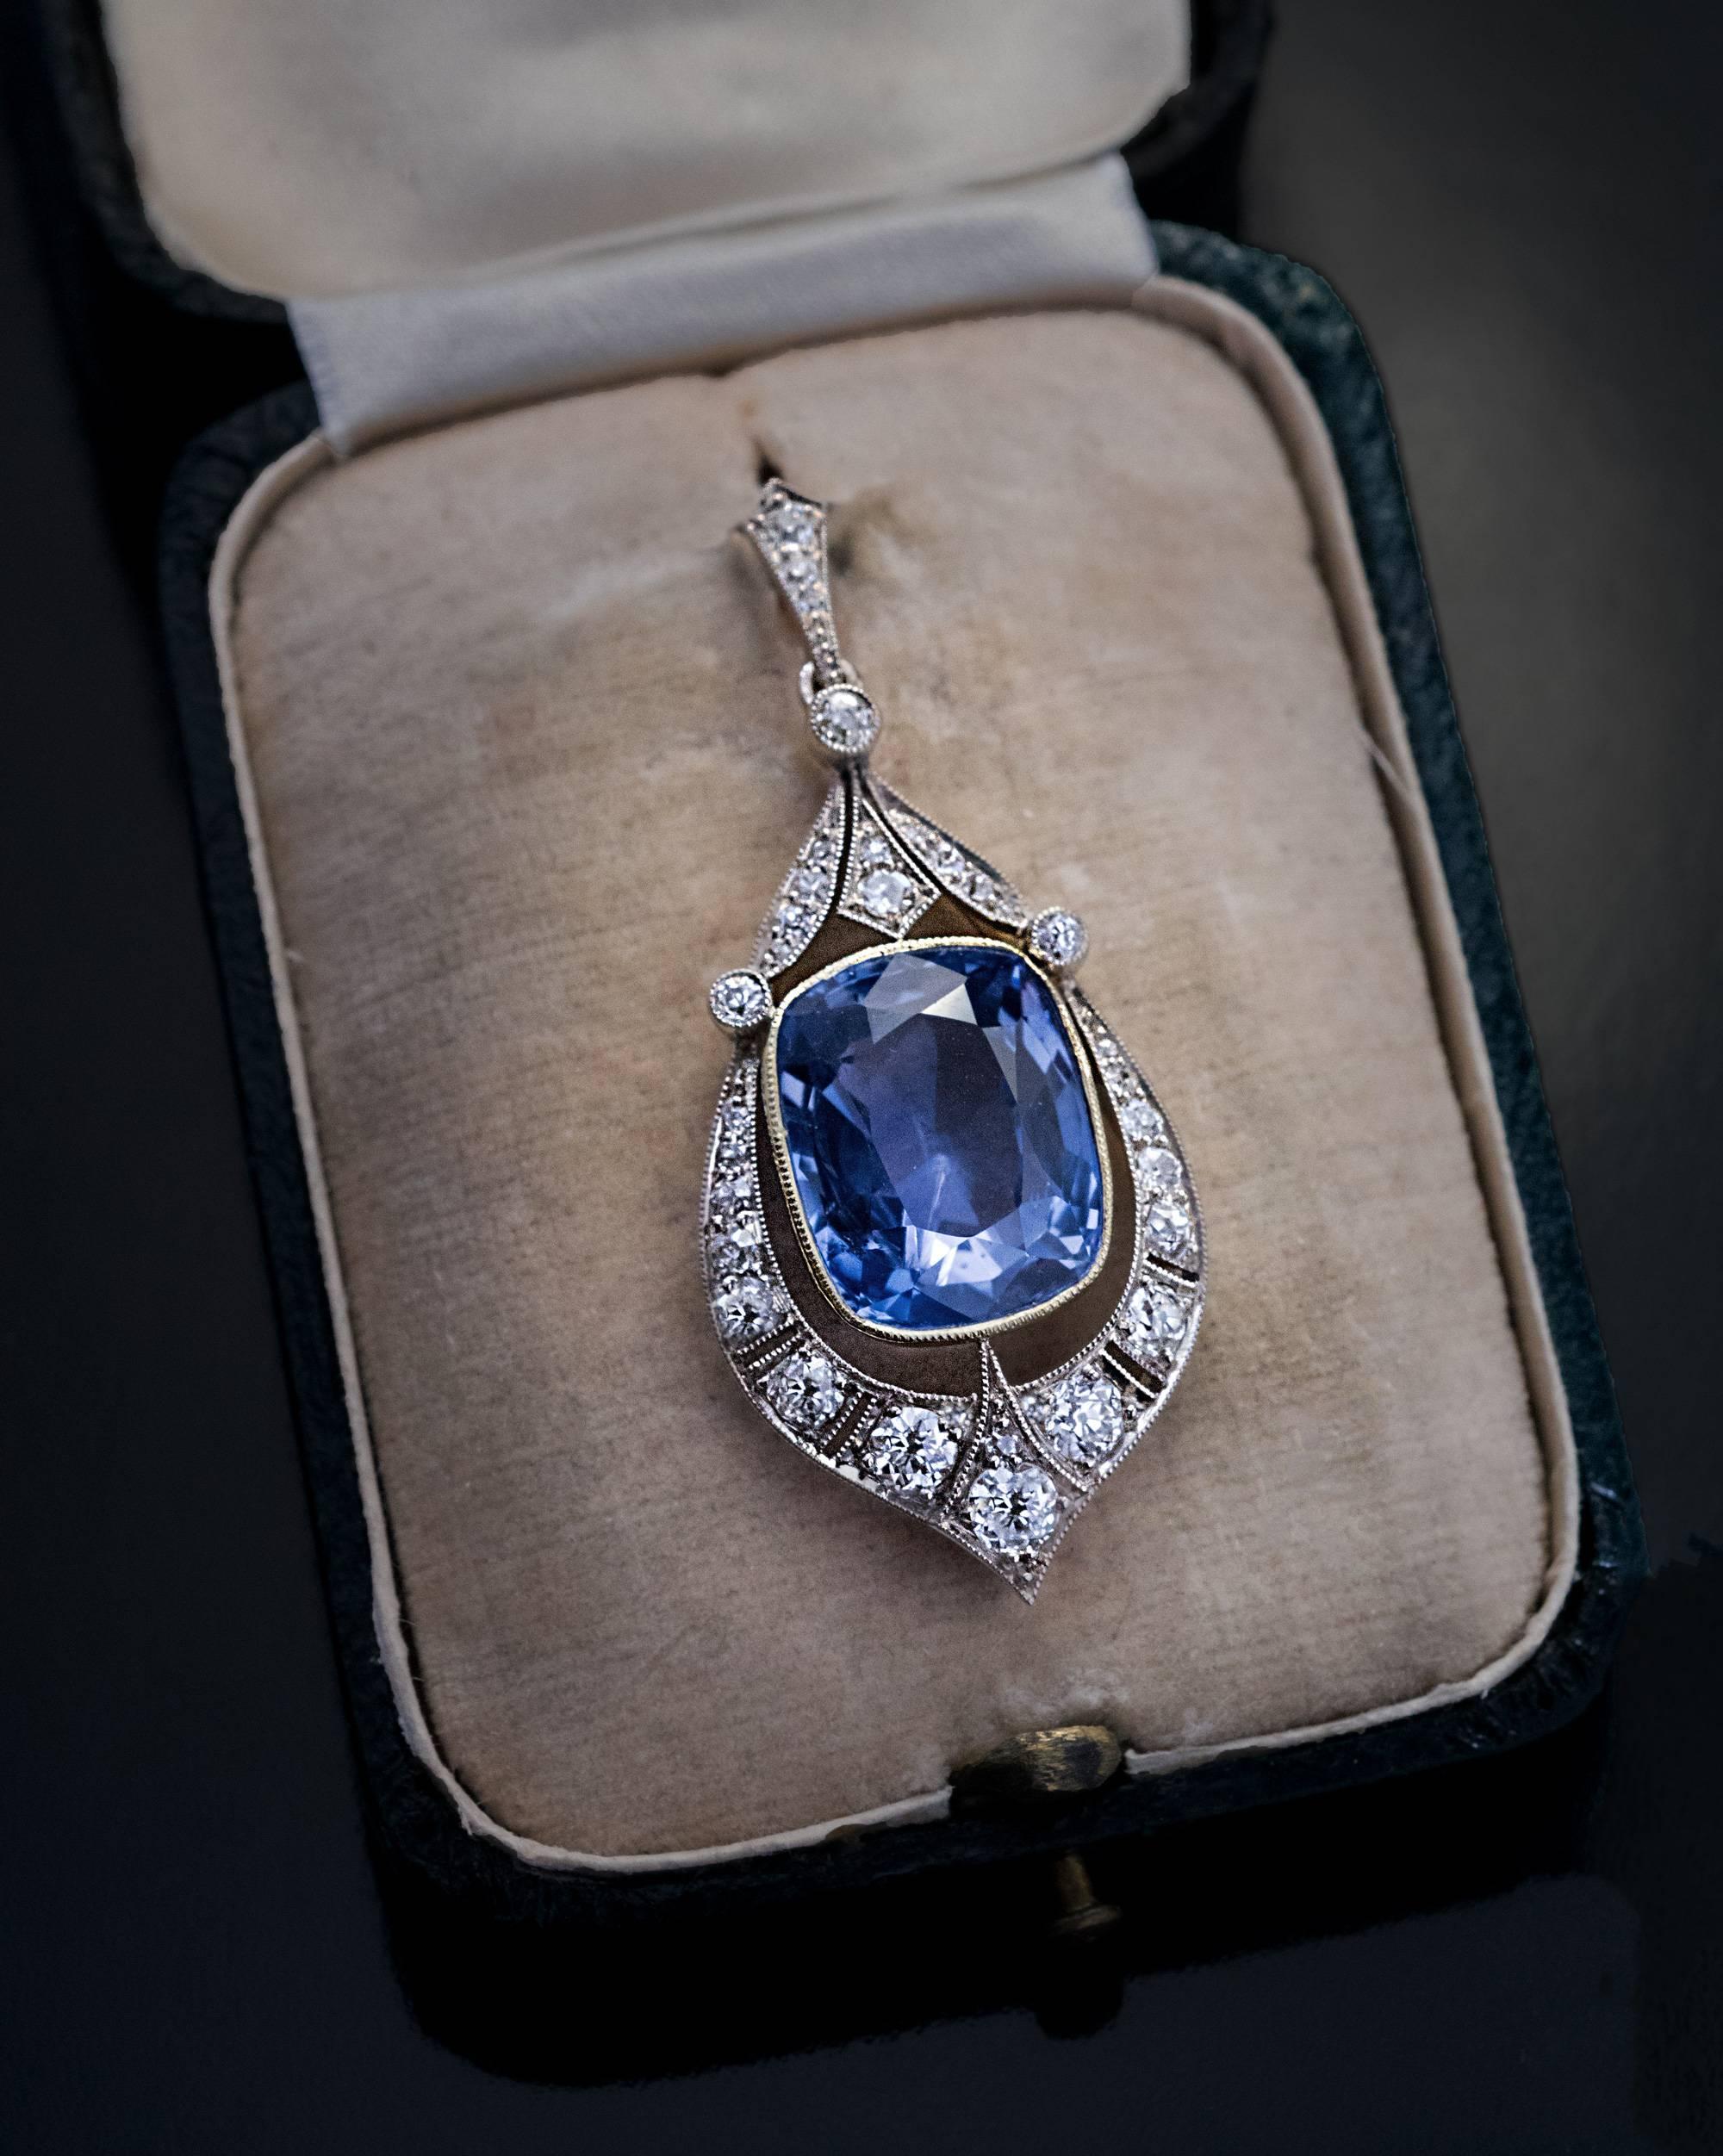 Made in Moscow around 1930
A vintage silver-topped 14K gold Art Deco pendant features an impressive 12.47 ct natural unheated sapphire from Ceylon. The sapphire is set in an elaborate frame embellished with transitional and old cut diamonds